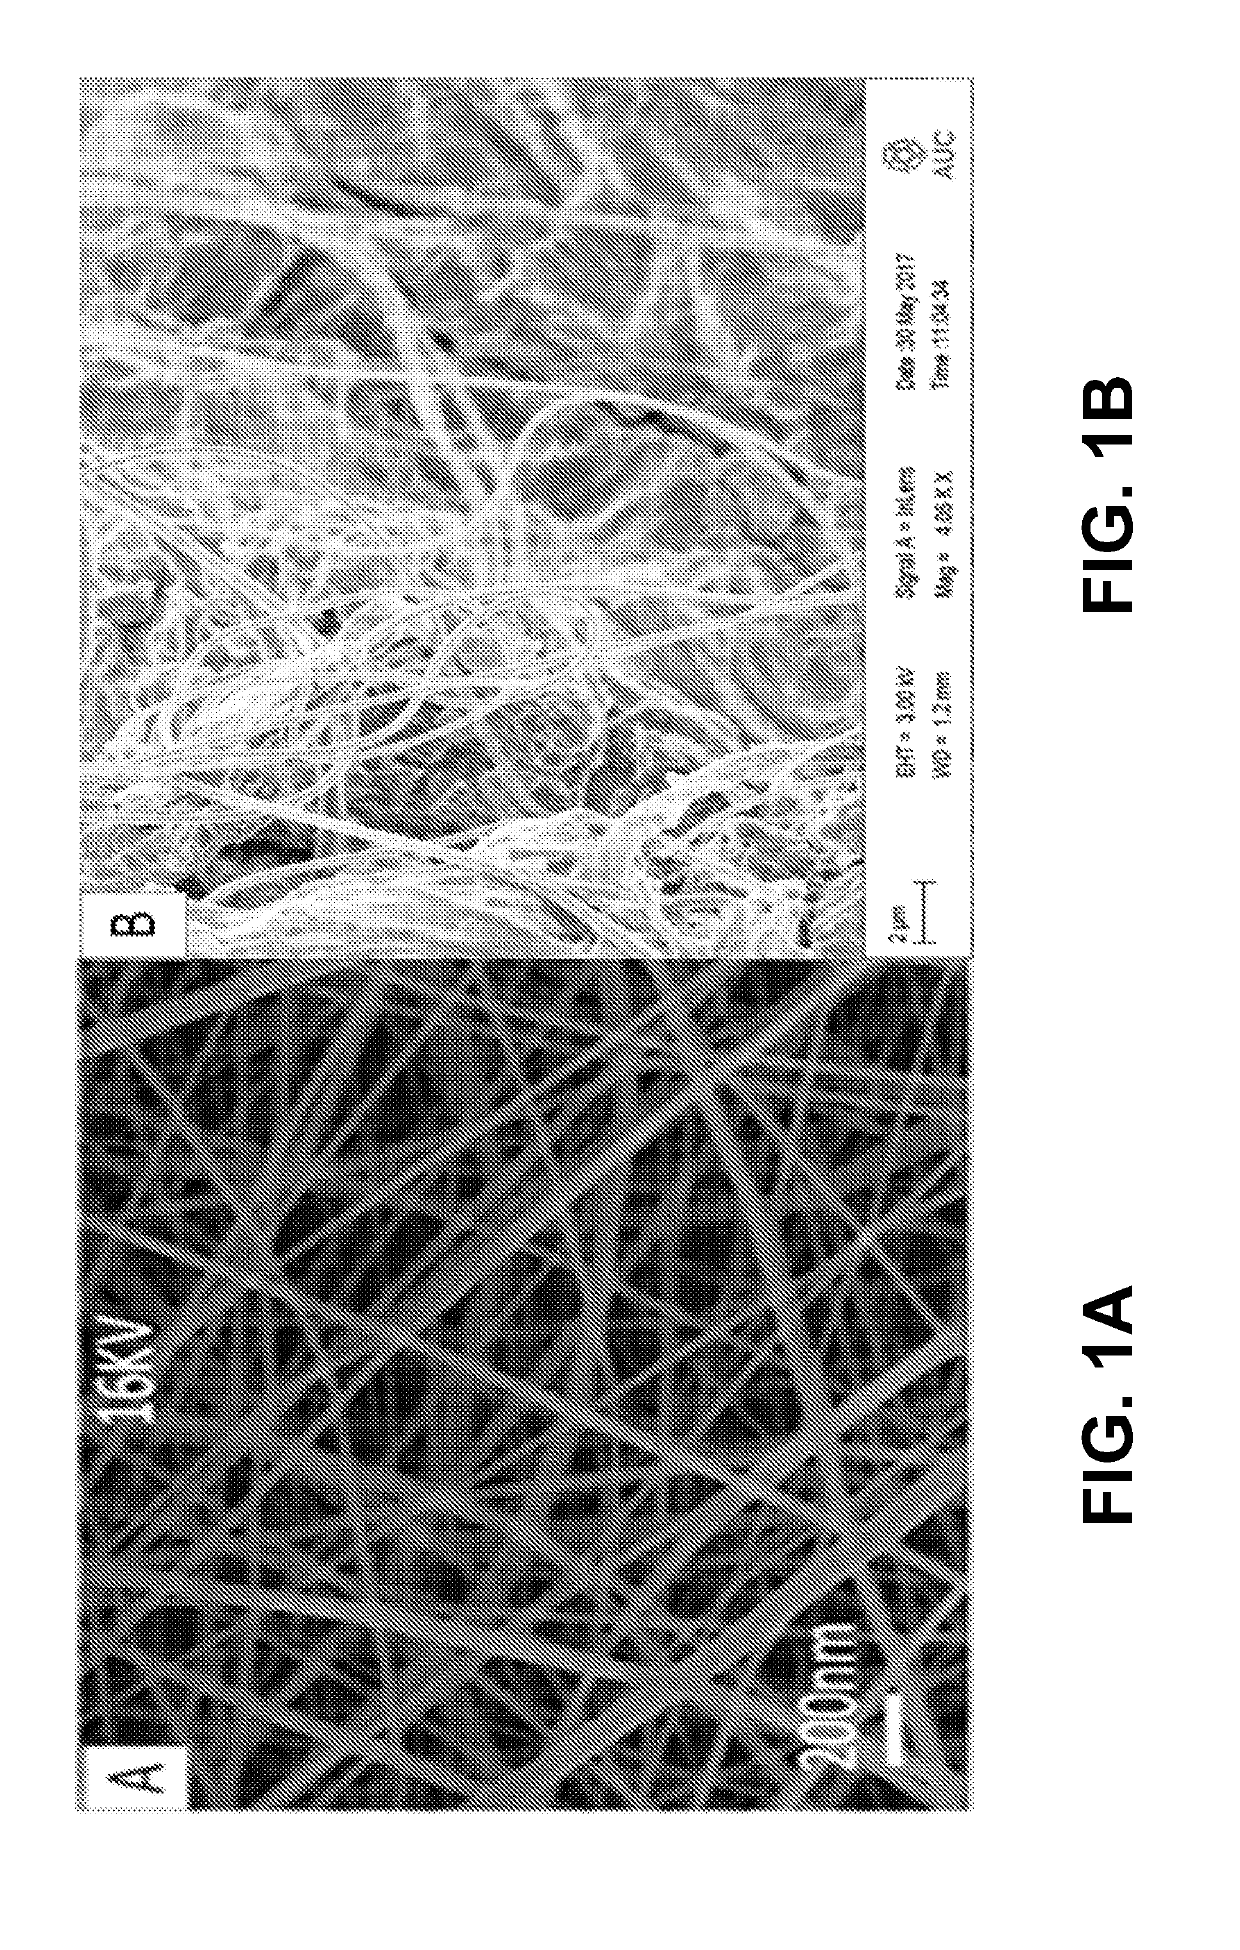 Polyvinyl alcohol/chitosan composite soluble electrospun nanofibers for disinfectant Anti-bacterial and Anti-corrosion applications